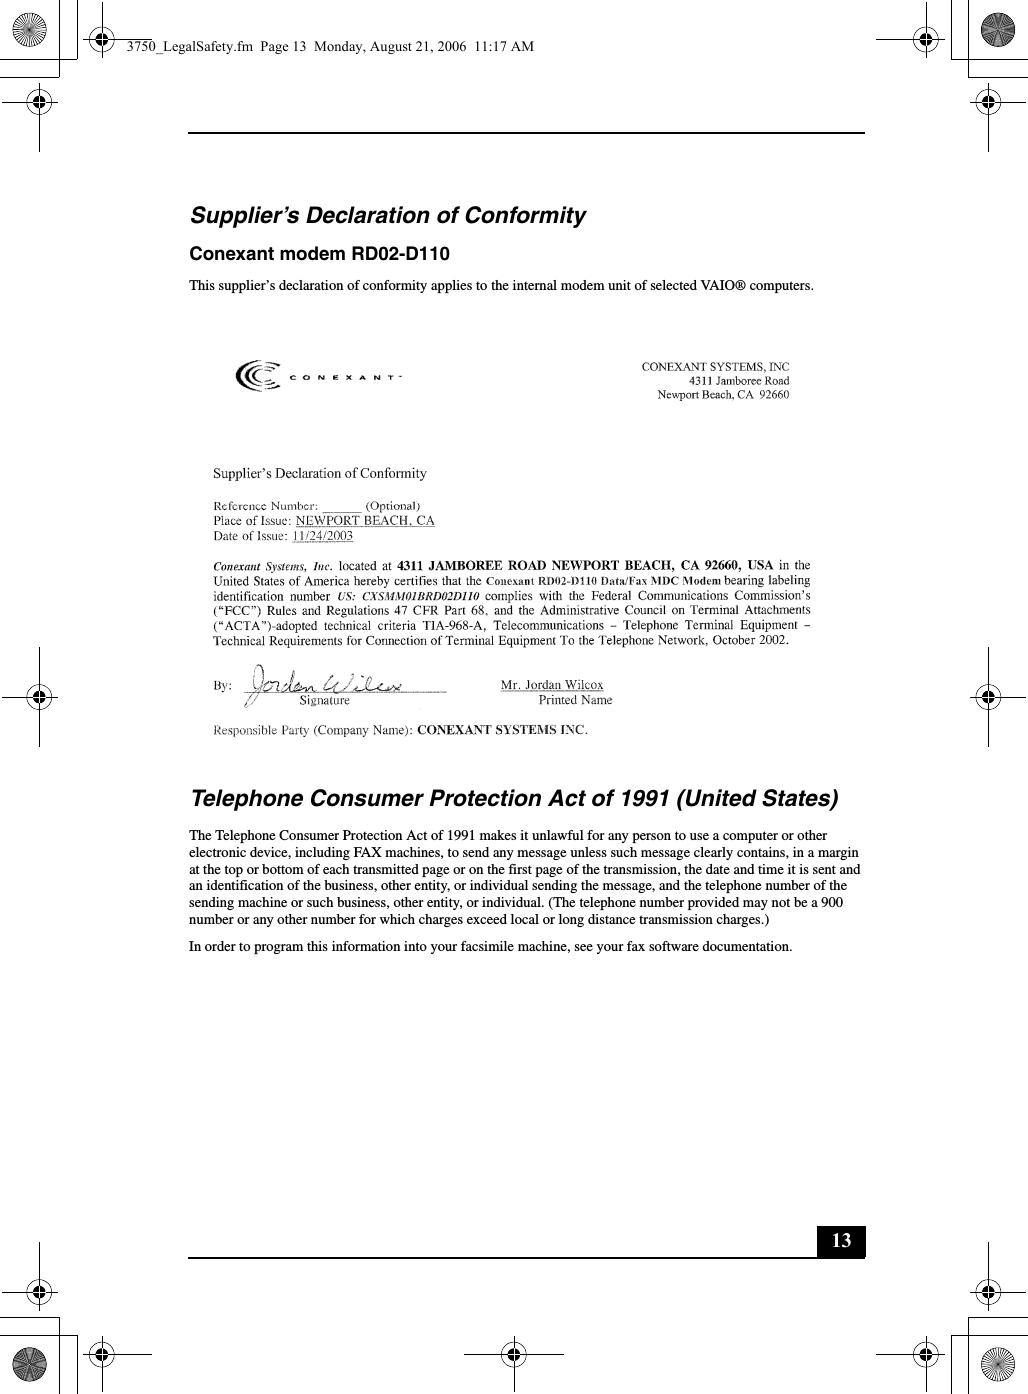 13Supplier’s Declaration of ConformityConexant modem RD02-D110This supplier’s declaration of conformity applies to the internal modem unit of selected VAIO® computers.Telephone Consumer Protection Act of 1991 (United States) The Telephone Consumer Protection Act of 1991 makes it unlawful for any person to use a computer or other electronic device, including FAX machines, to send any message unless such message clearly contains, in a margin at the top or bottom of each transmitted page or on the first page of the transmission, the date and time it is sent and an identification of the business, other entity, or individual sending the message, and the telephone number of the sending machine or such business, other entity, or individual. (The telephone number provided may not be a 900 number or any other number for which charges exceed local or long distance transmission charges.)In order to program this information into your facsimile machine, see your fax software documentation.3750_LegalSafety.fm  Page 13  Monday, August 21, 2006  11:17 AM